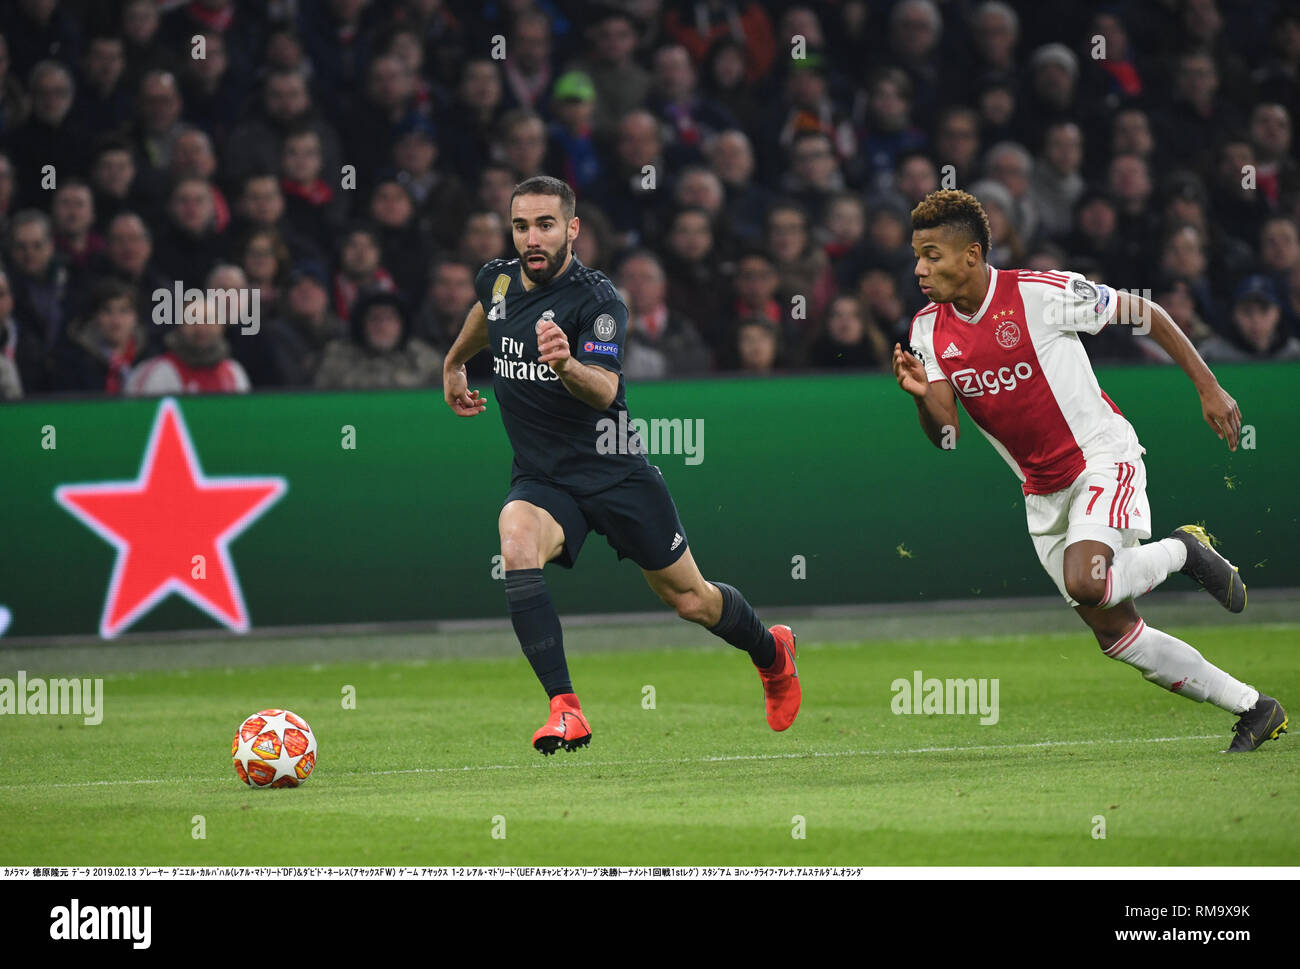 Amsterdam, Netherlands. 13th Feb, 2019. Real Madrid's Daniel Carvajal (L) and Ajax's David Neres during the UEFA Champions League Round of 16 1st leg match between AFC Ajax 1-2 Real Madrid CF at Johan Cruijff Arena in Amsterdam, Netherlands, February 13, 2019. Credit: Takamoto Tokuhara/AFLO/Alamy Live News Stock Photo